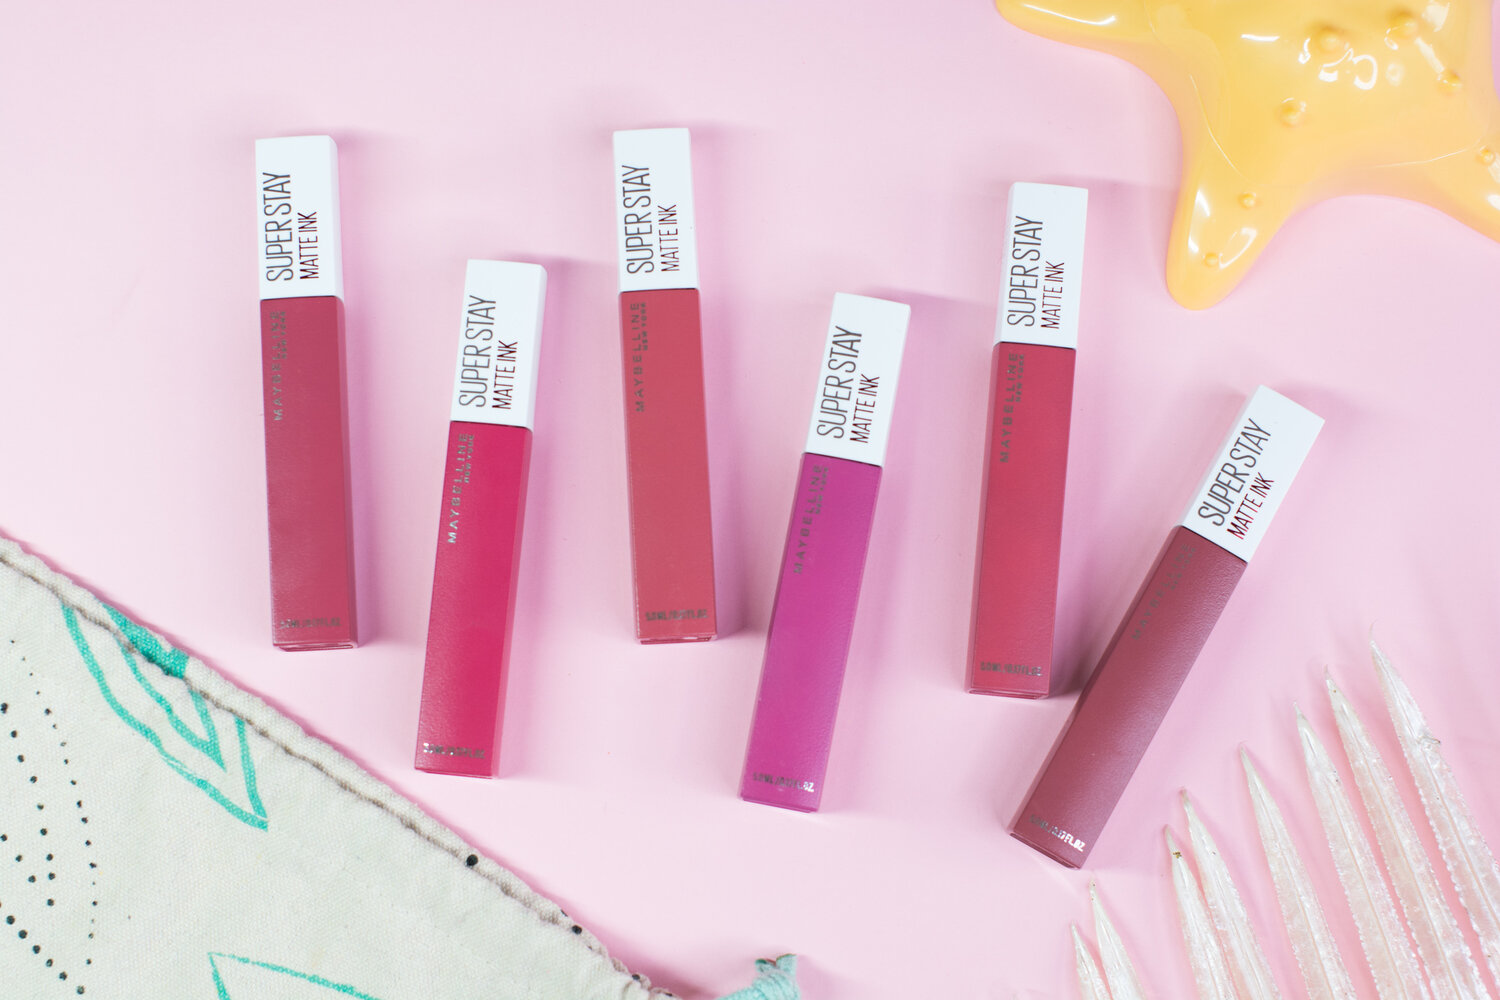 Maybelline's Superstay Matte Ink Pink Edition: Fun, wearable pinks